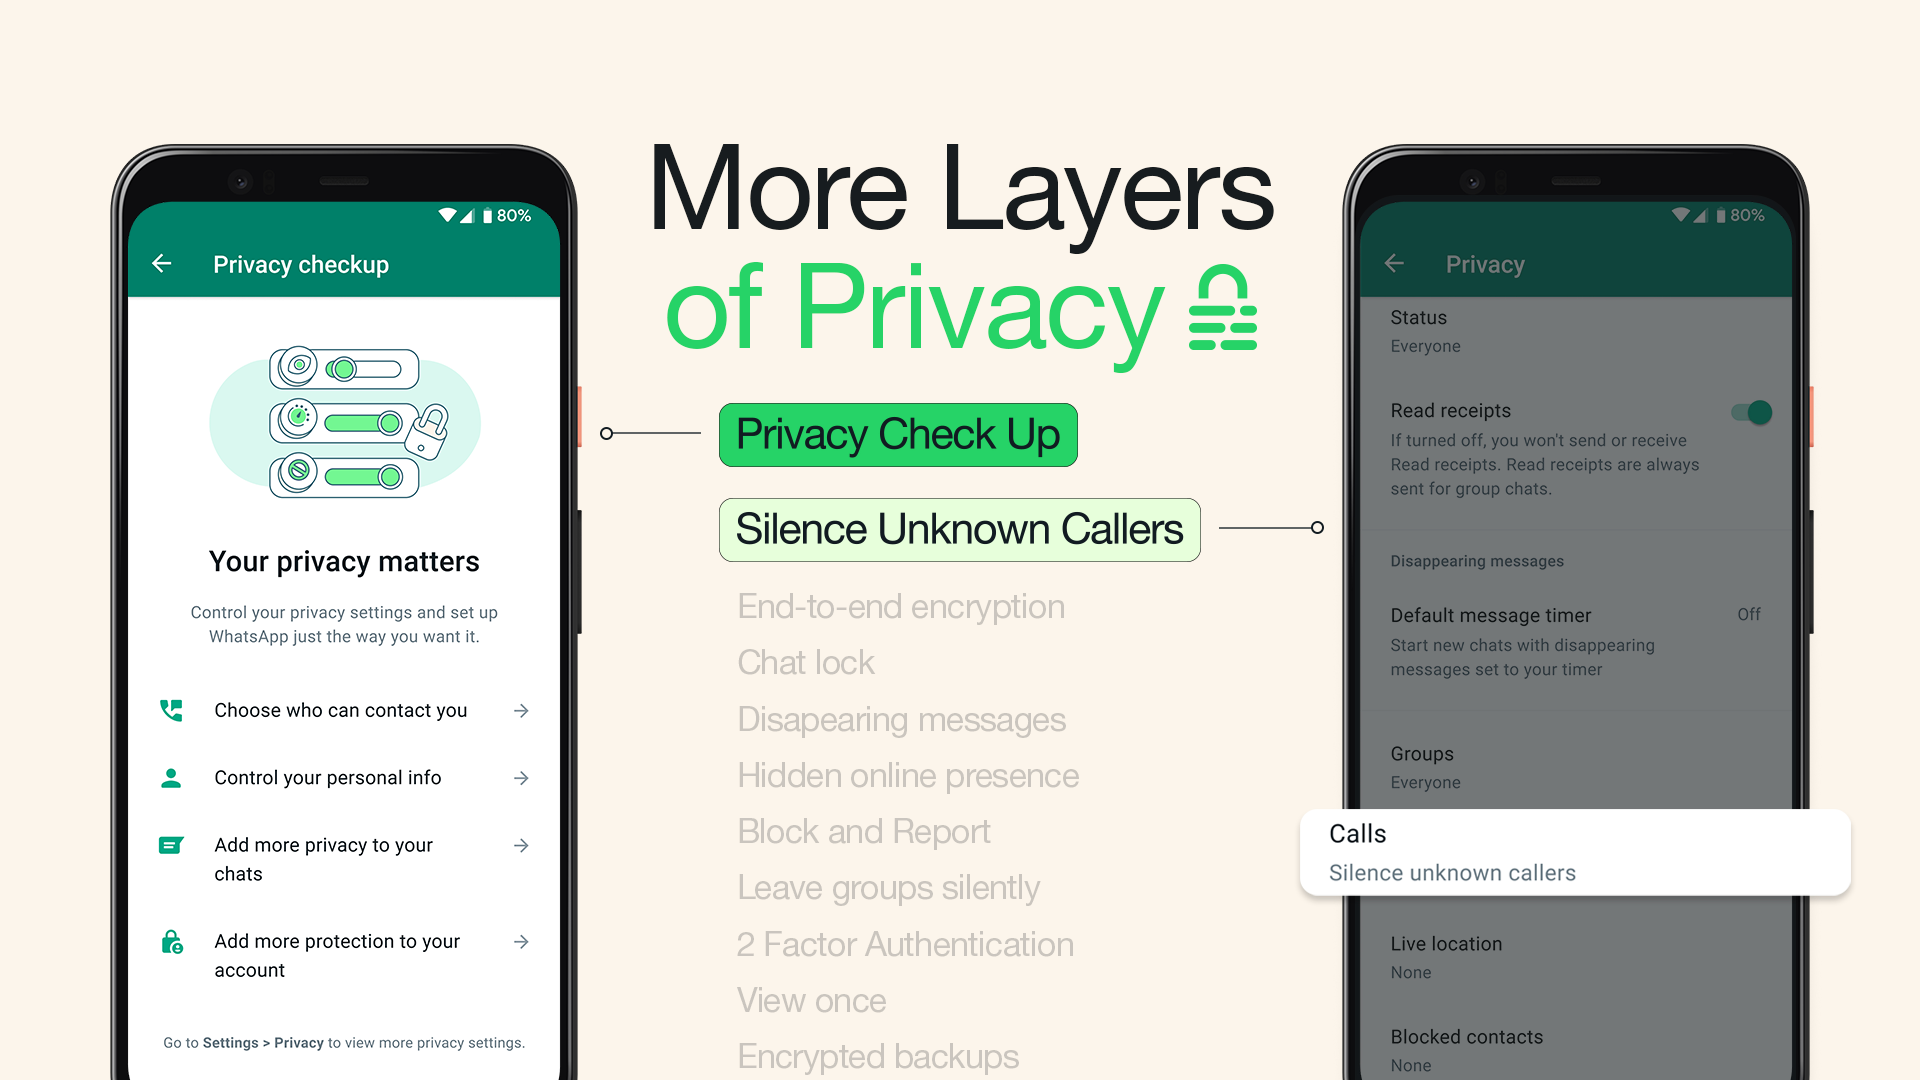 WhatsApp introduces new privacy features: Silence Unknown Callers and Privacy Checkup